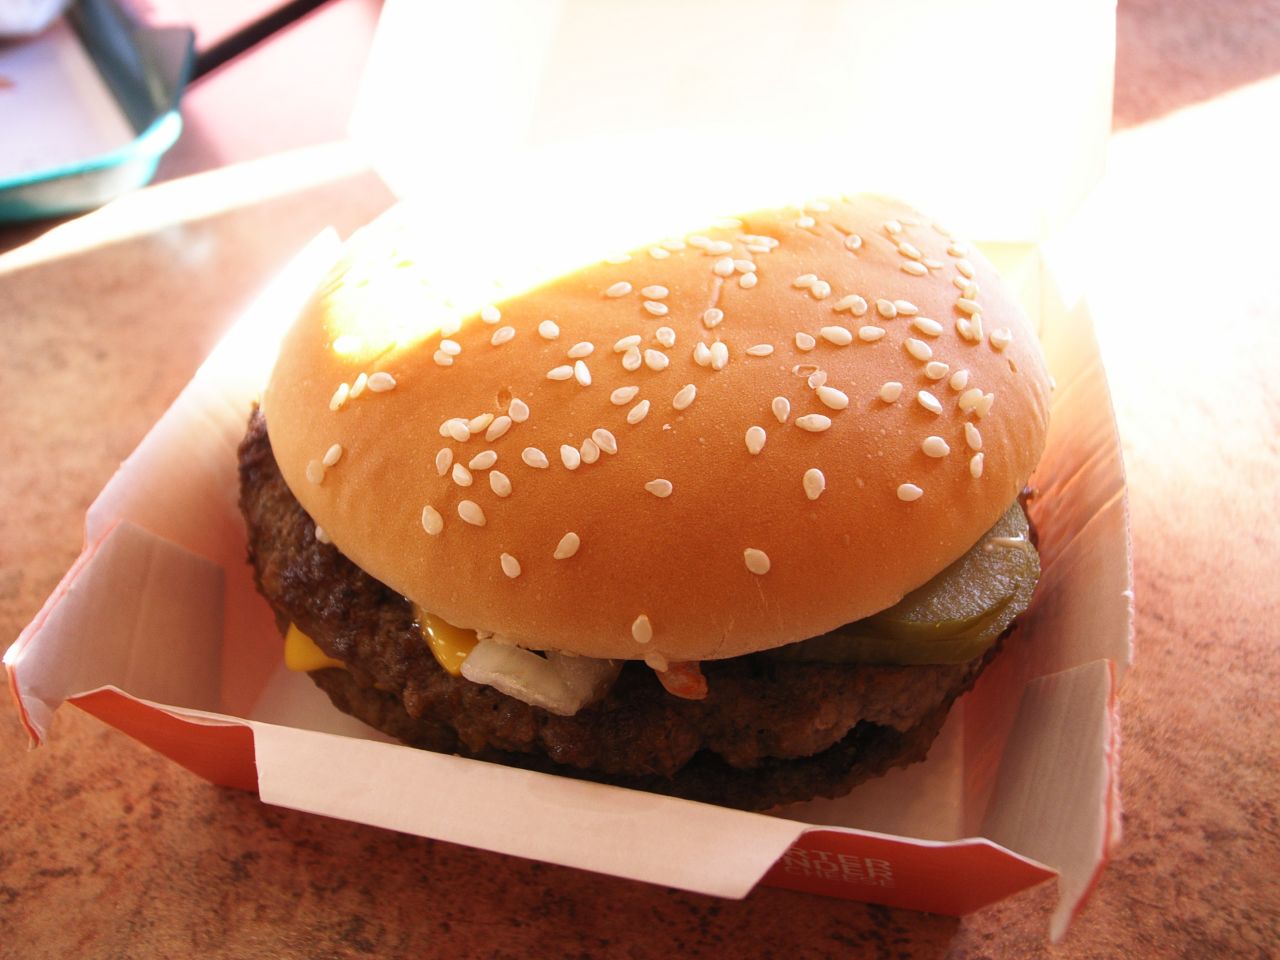 a cheeseburger in a paper container with toppings